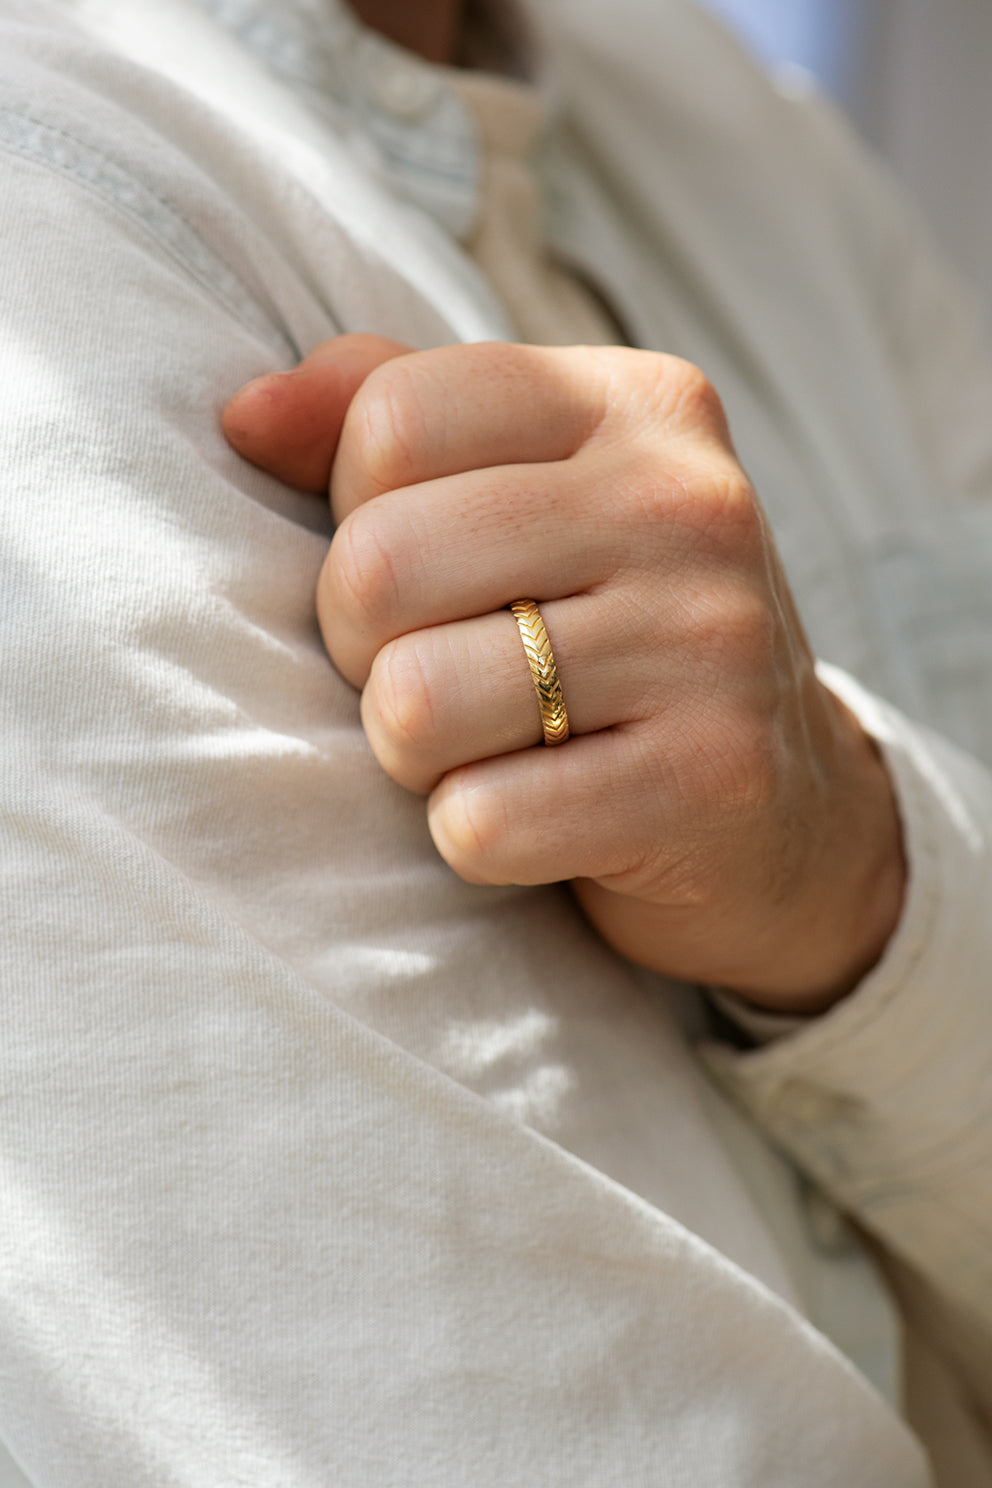 Engagement Ring Finger for Male and Female - DR Blog